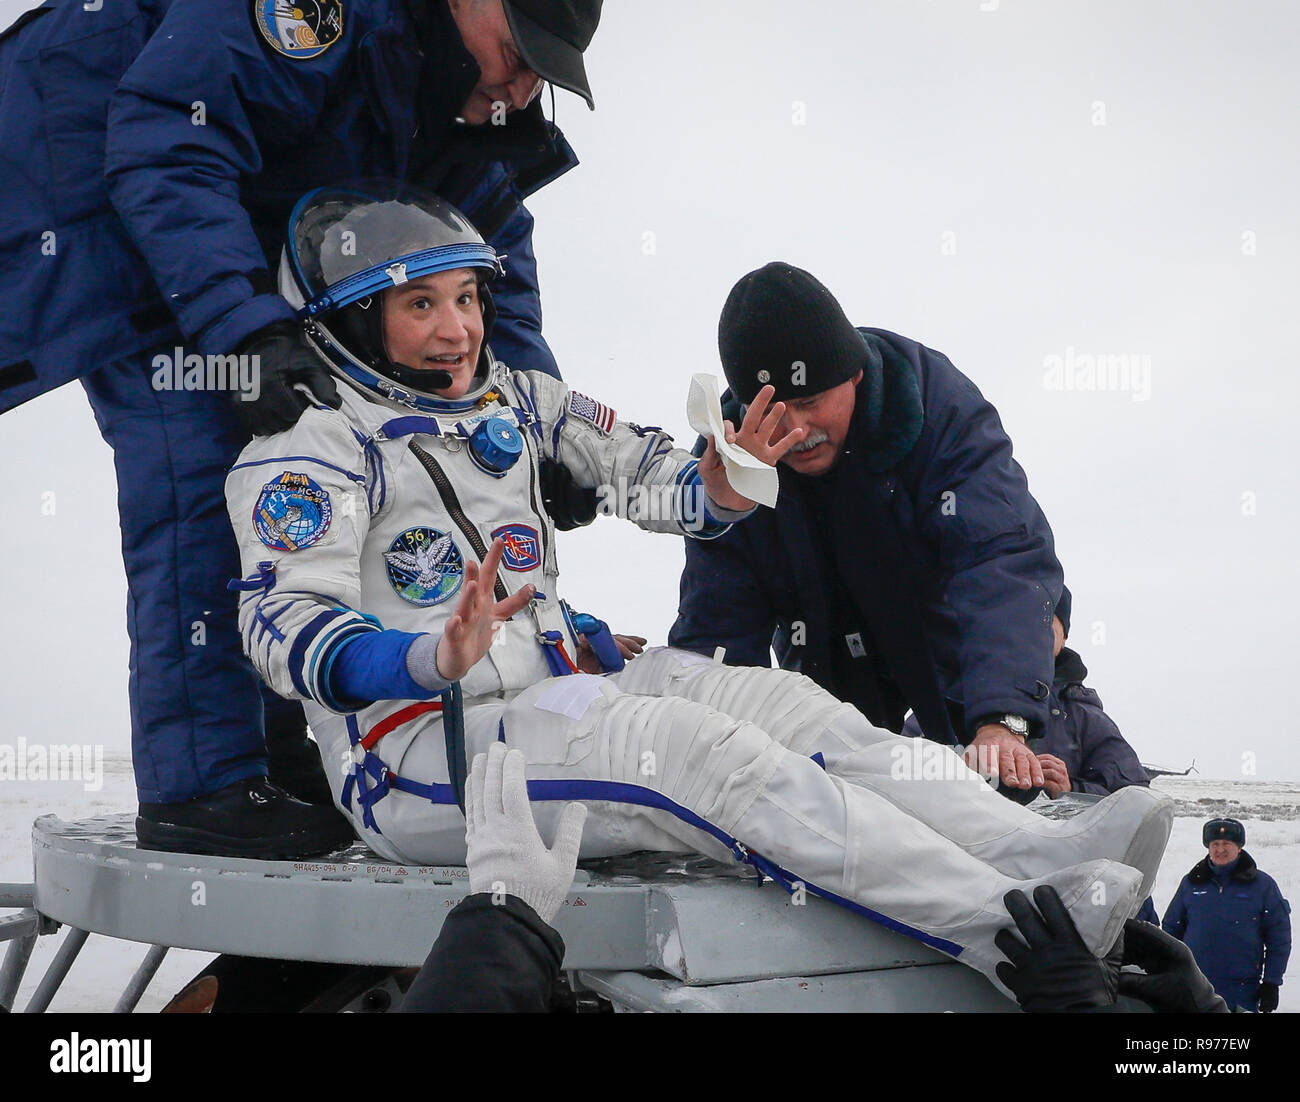 Ground personnel help NASA's Serena Aunon-Chancellor to get out of capsule after landing in a remote area outside the town of Zhezkazgan, formerly known as Dzhezkazgan, Kazakhstan, on Thursday, Dec. 20, 2018. Three astronauts have returned to Earth after more than six months aboard the International Space Station. (Shamil Zhumatov/Pool via AP) Stock Photo